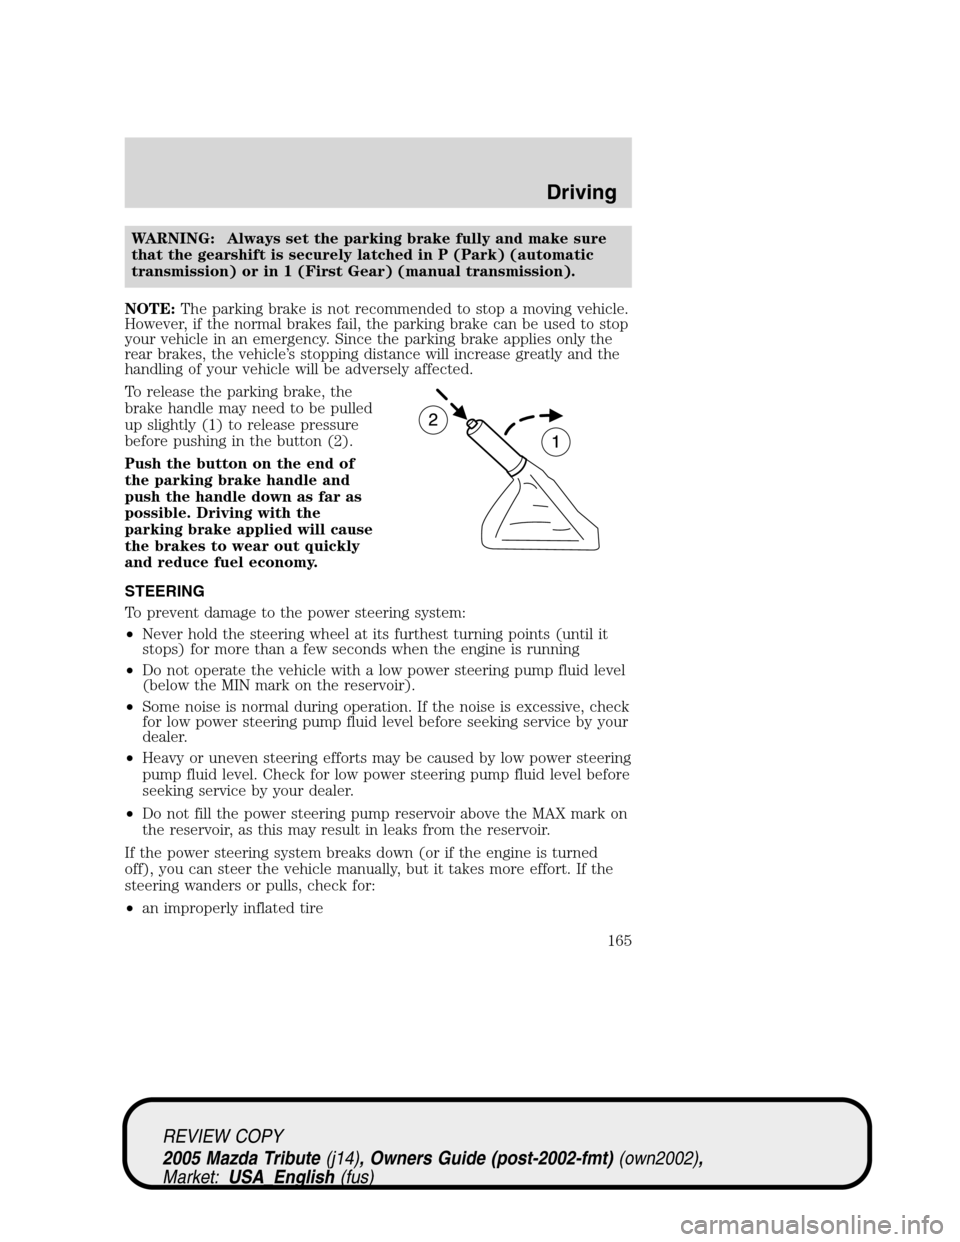 MAZDA MODEL TRIBUTE 2005  Owners Manual (in English) WARNING: Always set the parking brake fully and make sure
that the gearshift is securely latched in P (Park) (automatic
transmission) or in 1 (First Gear) (manual transmission).
NOTE:The parking brake